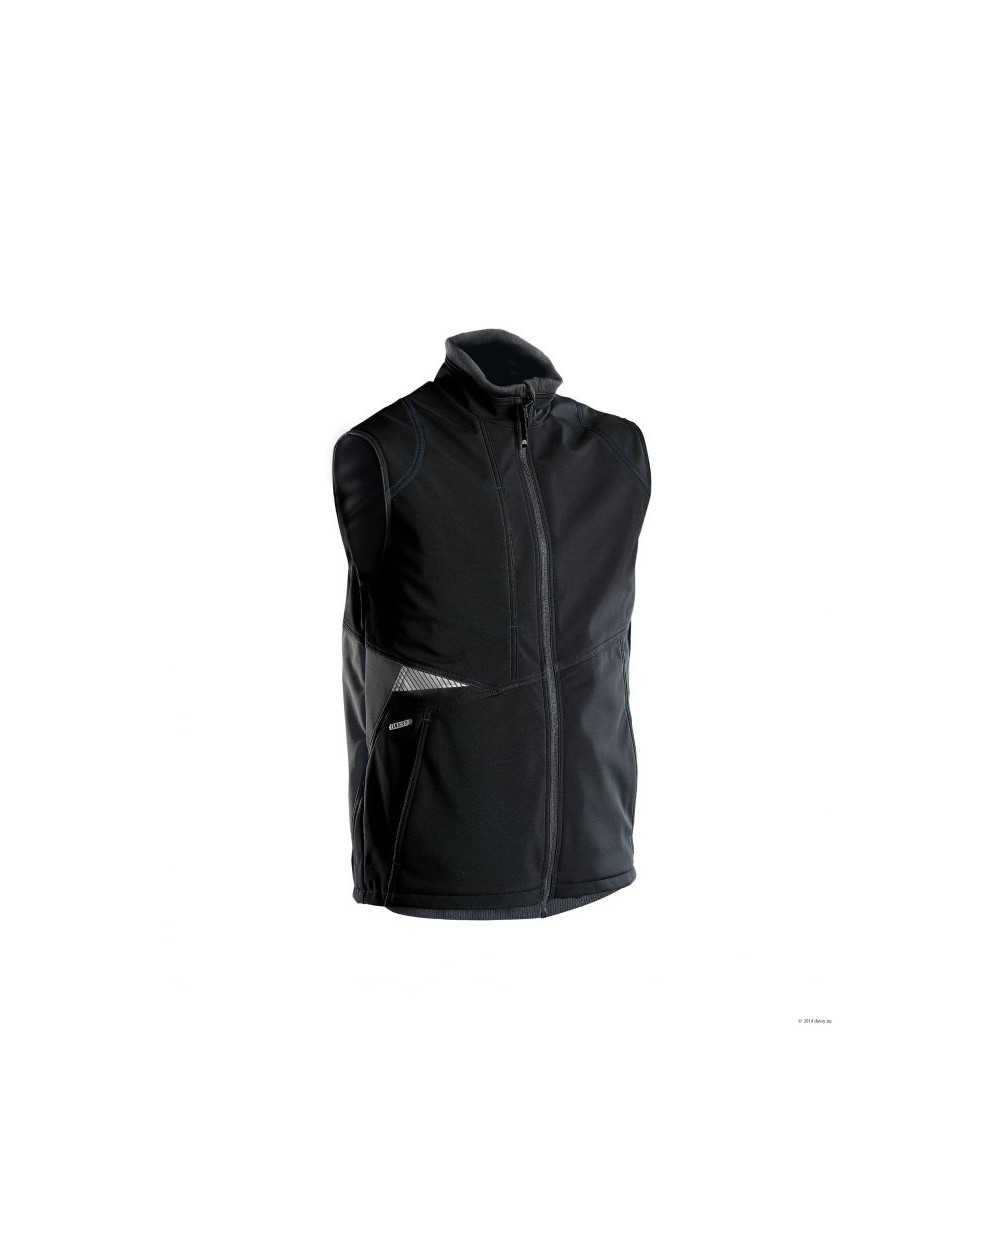 GILET Ss MANCHE SOFSTHELL  DBLE POLAIRE FUSION NOIR